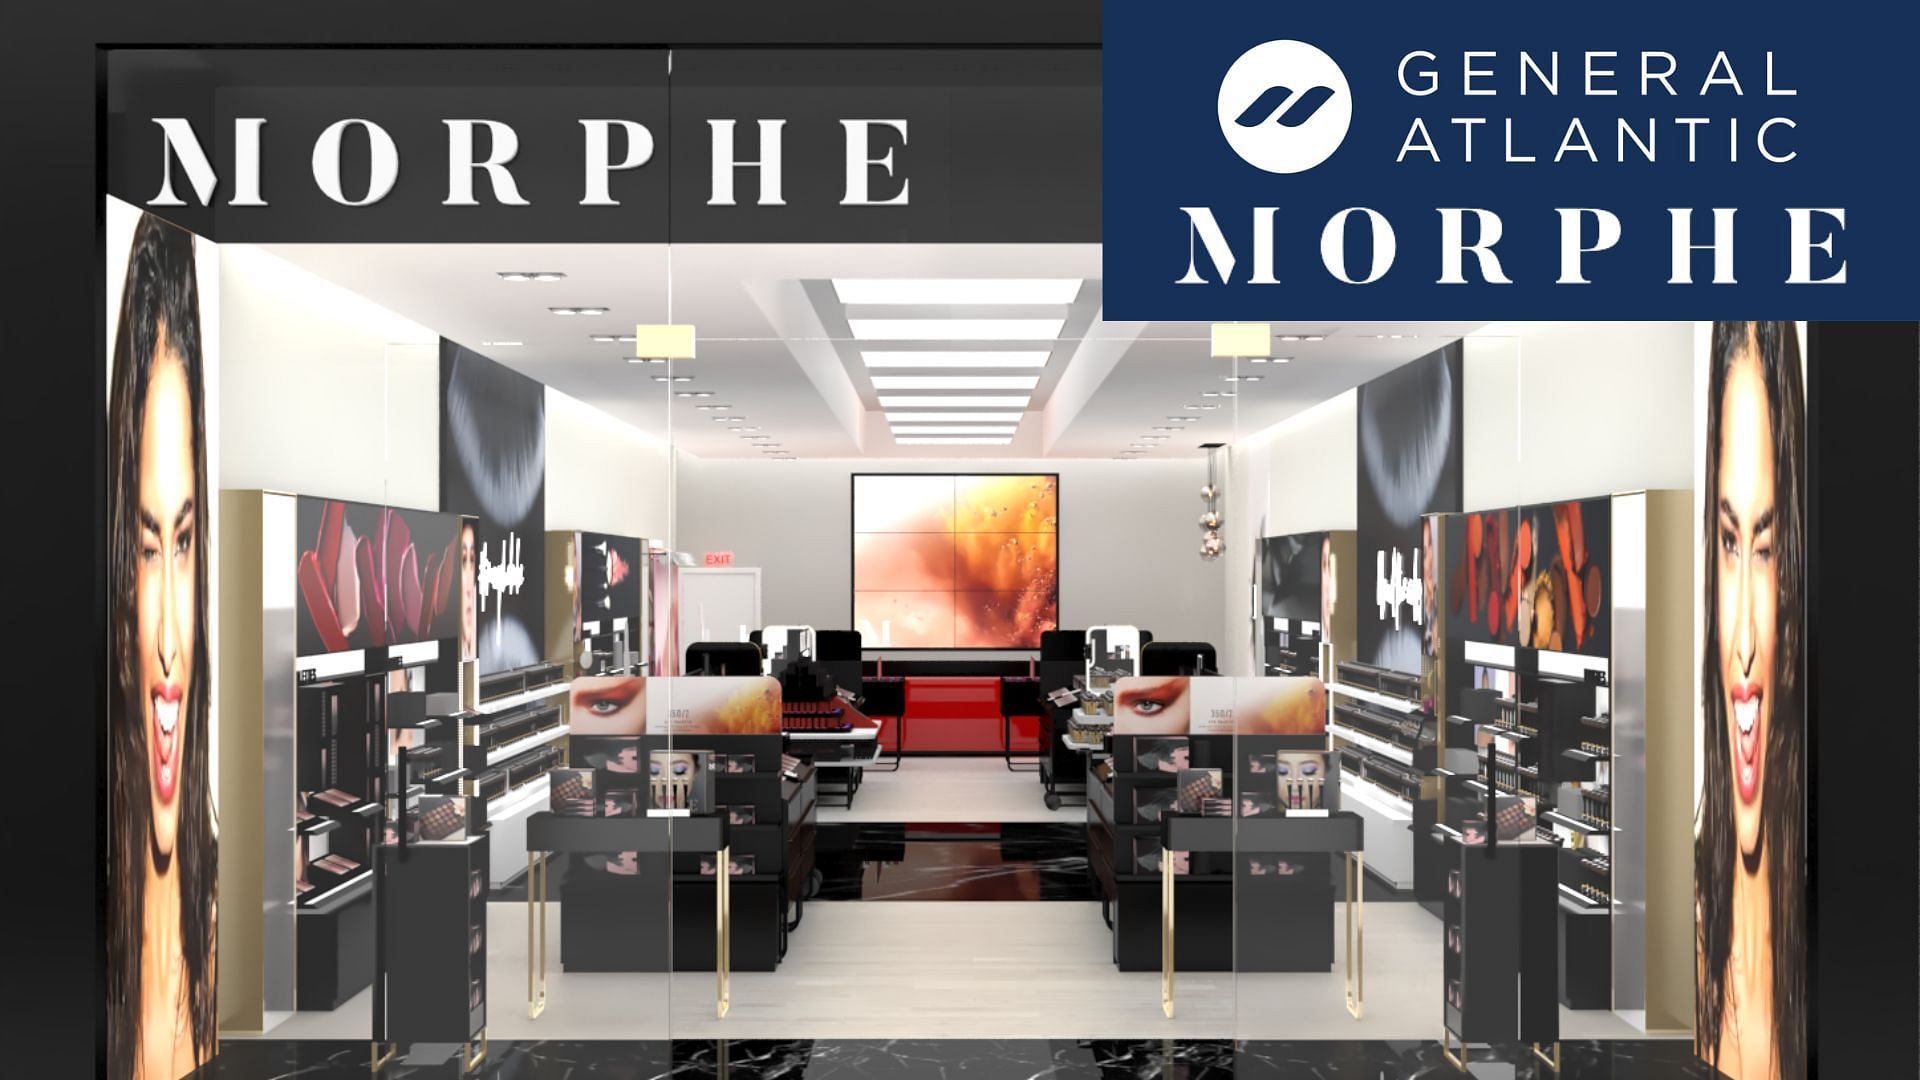 Morphe closes several retails store, much to the anguish of their employees (Image via morphe.com)